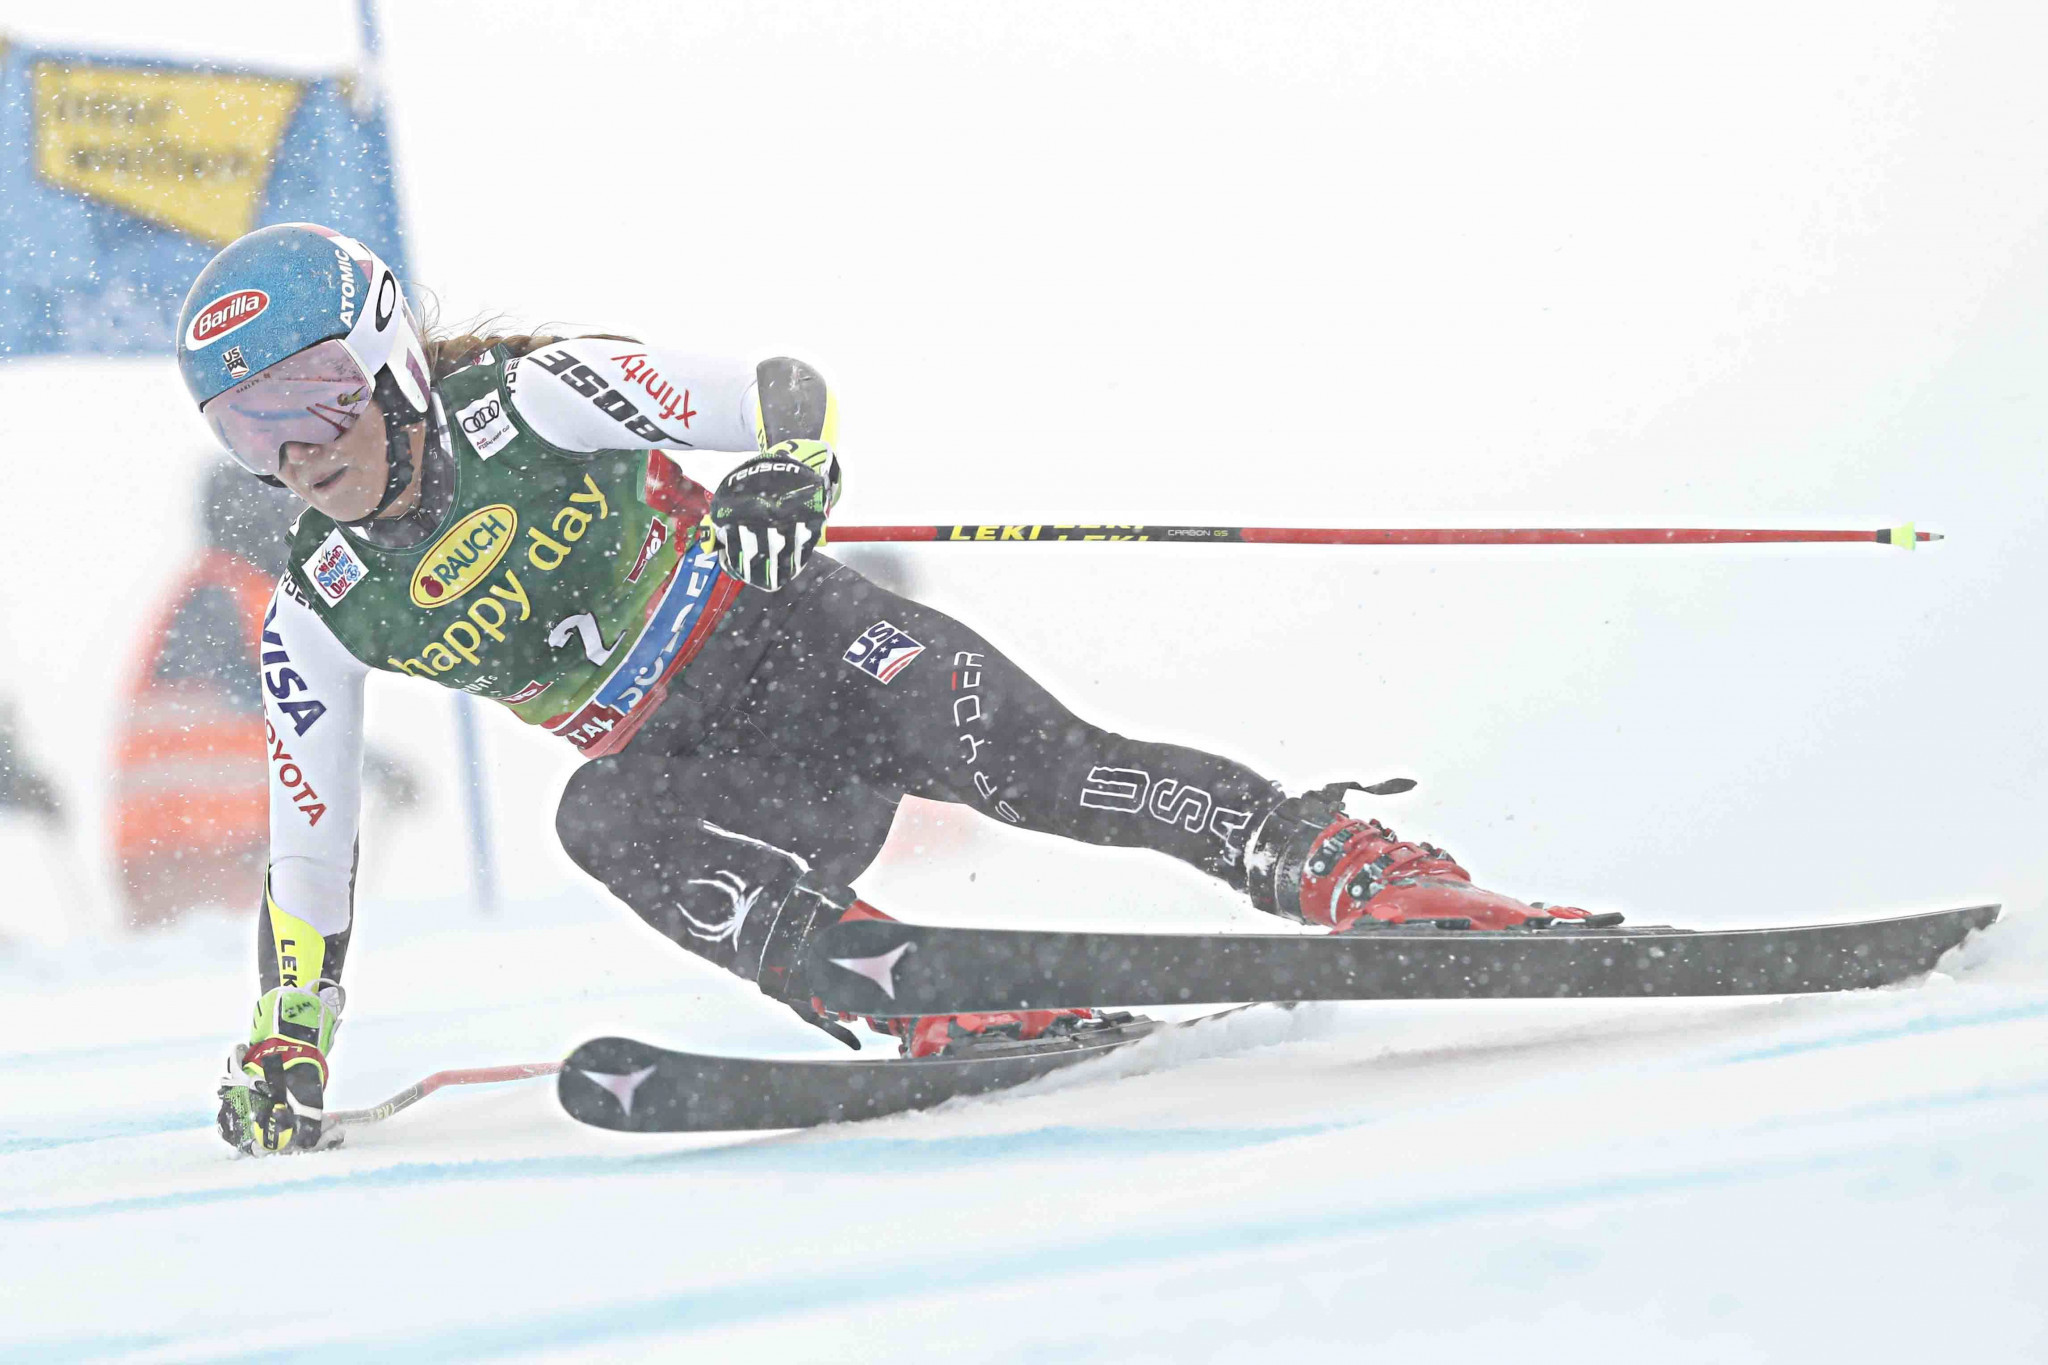 Mikaela Shiffrin is among the favourites to win the women's race ©Getty Images